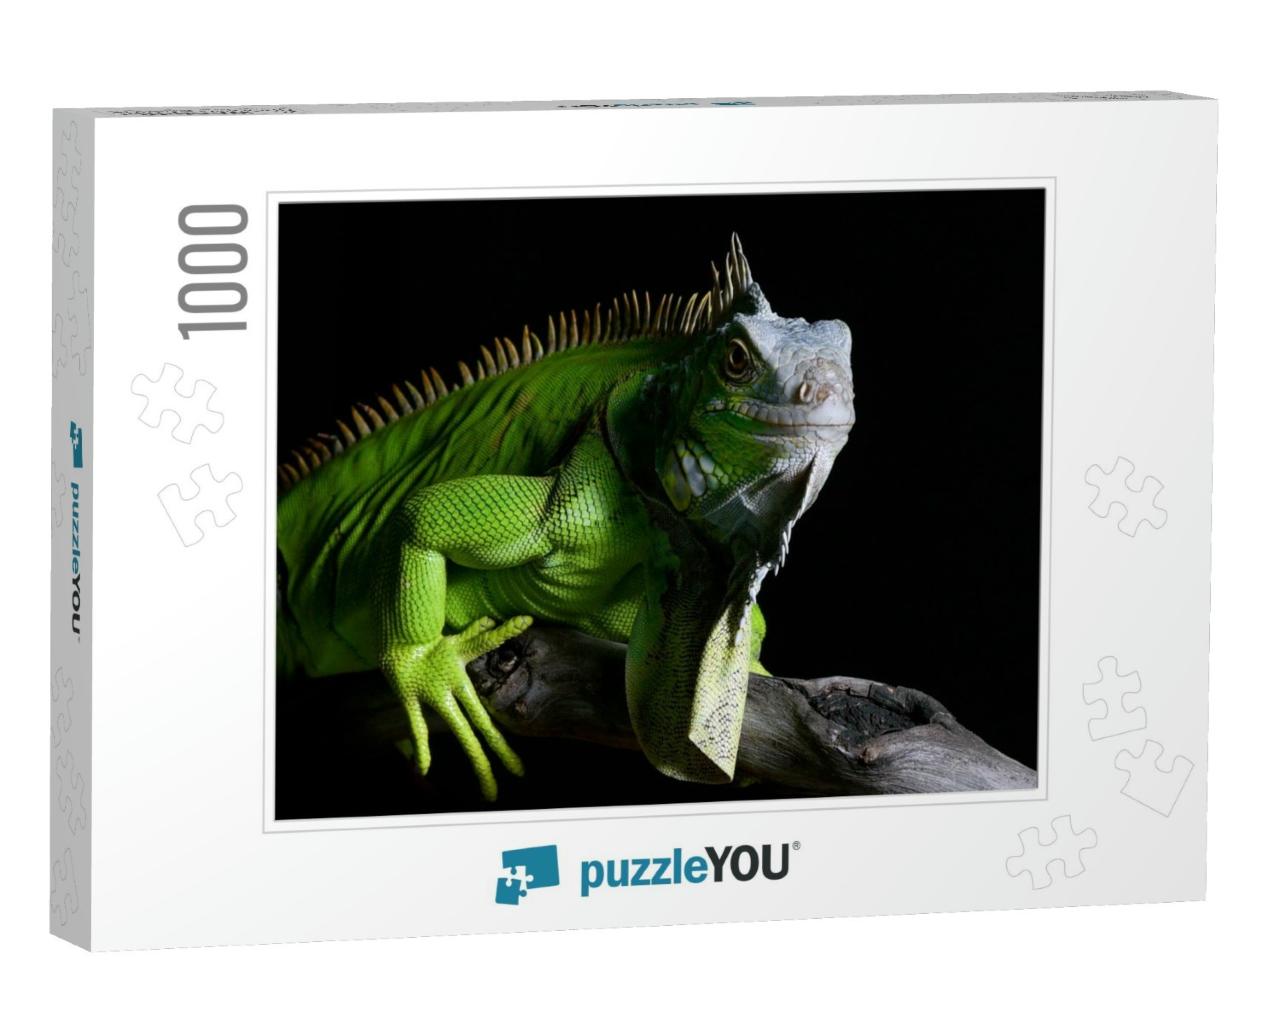 Big Green Iguana on Isolated Black Background... Jigsaw Puzzle with 1000 pieces